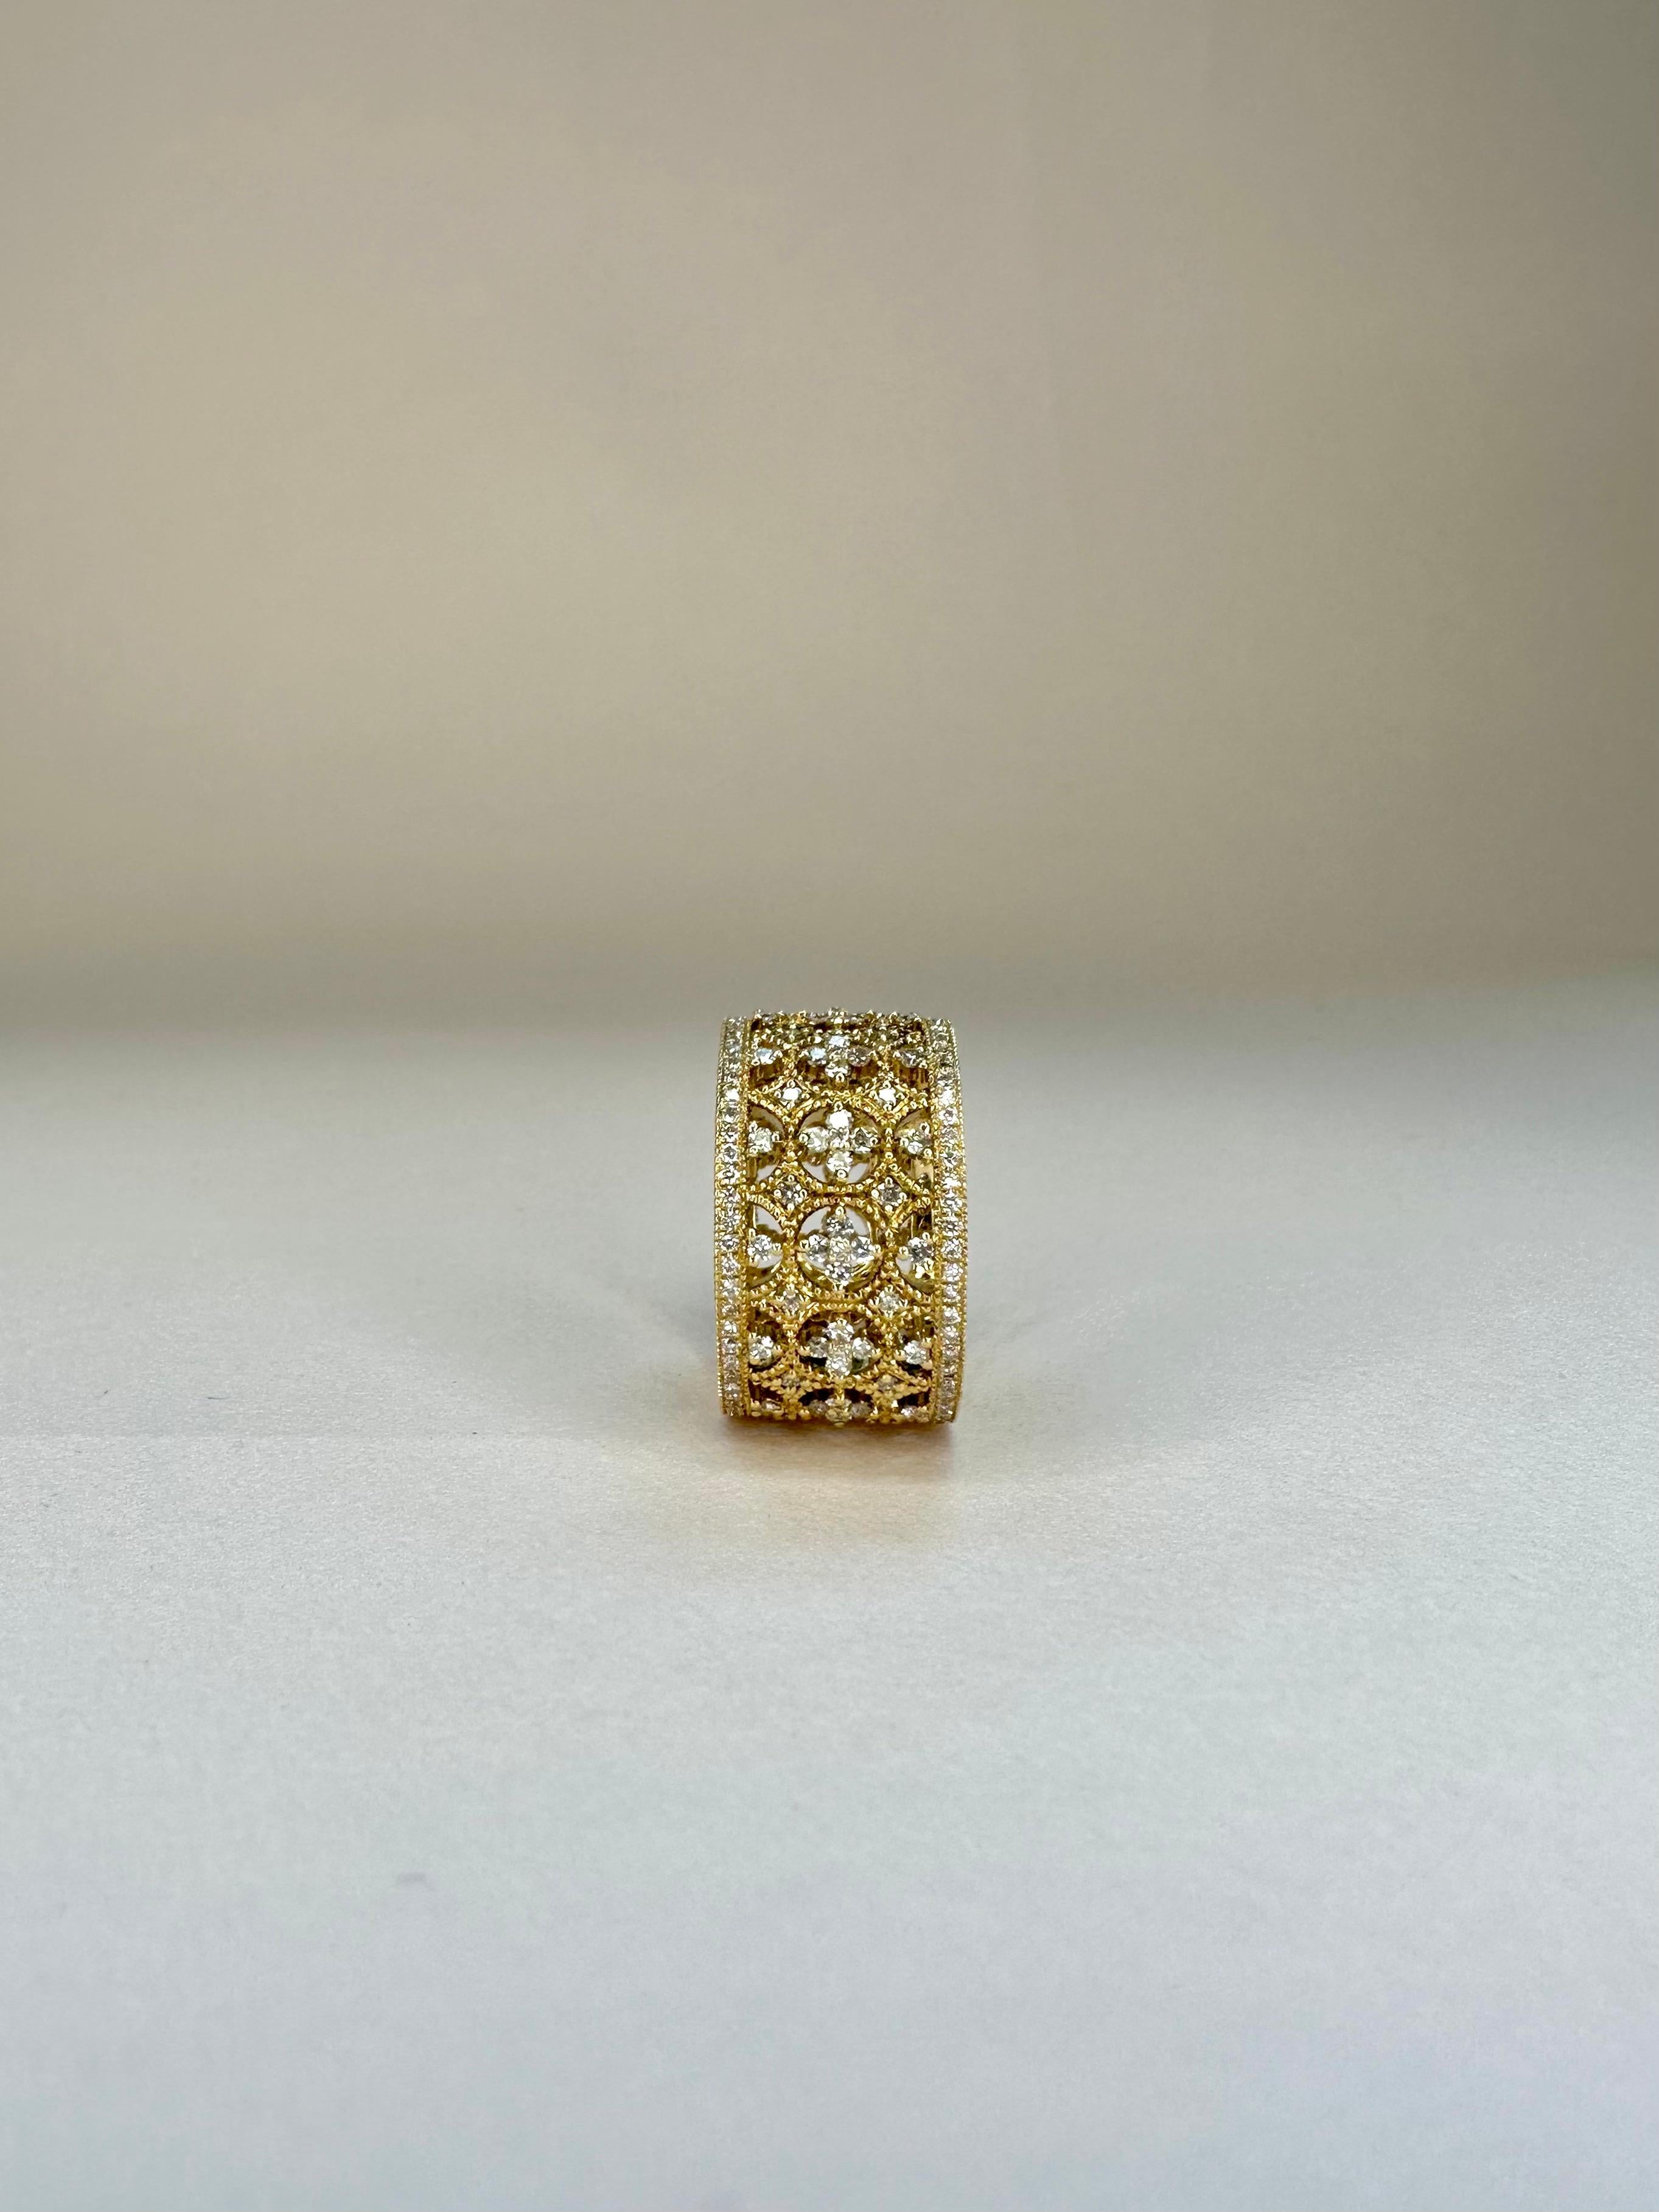 For Sale:  18k Yellow Gold Lace Band Ring 1.16 Cts Of Diamonds Milgrain Setting 6